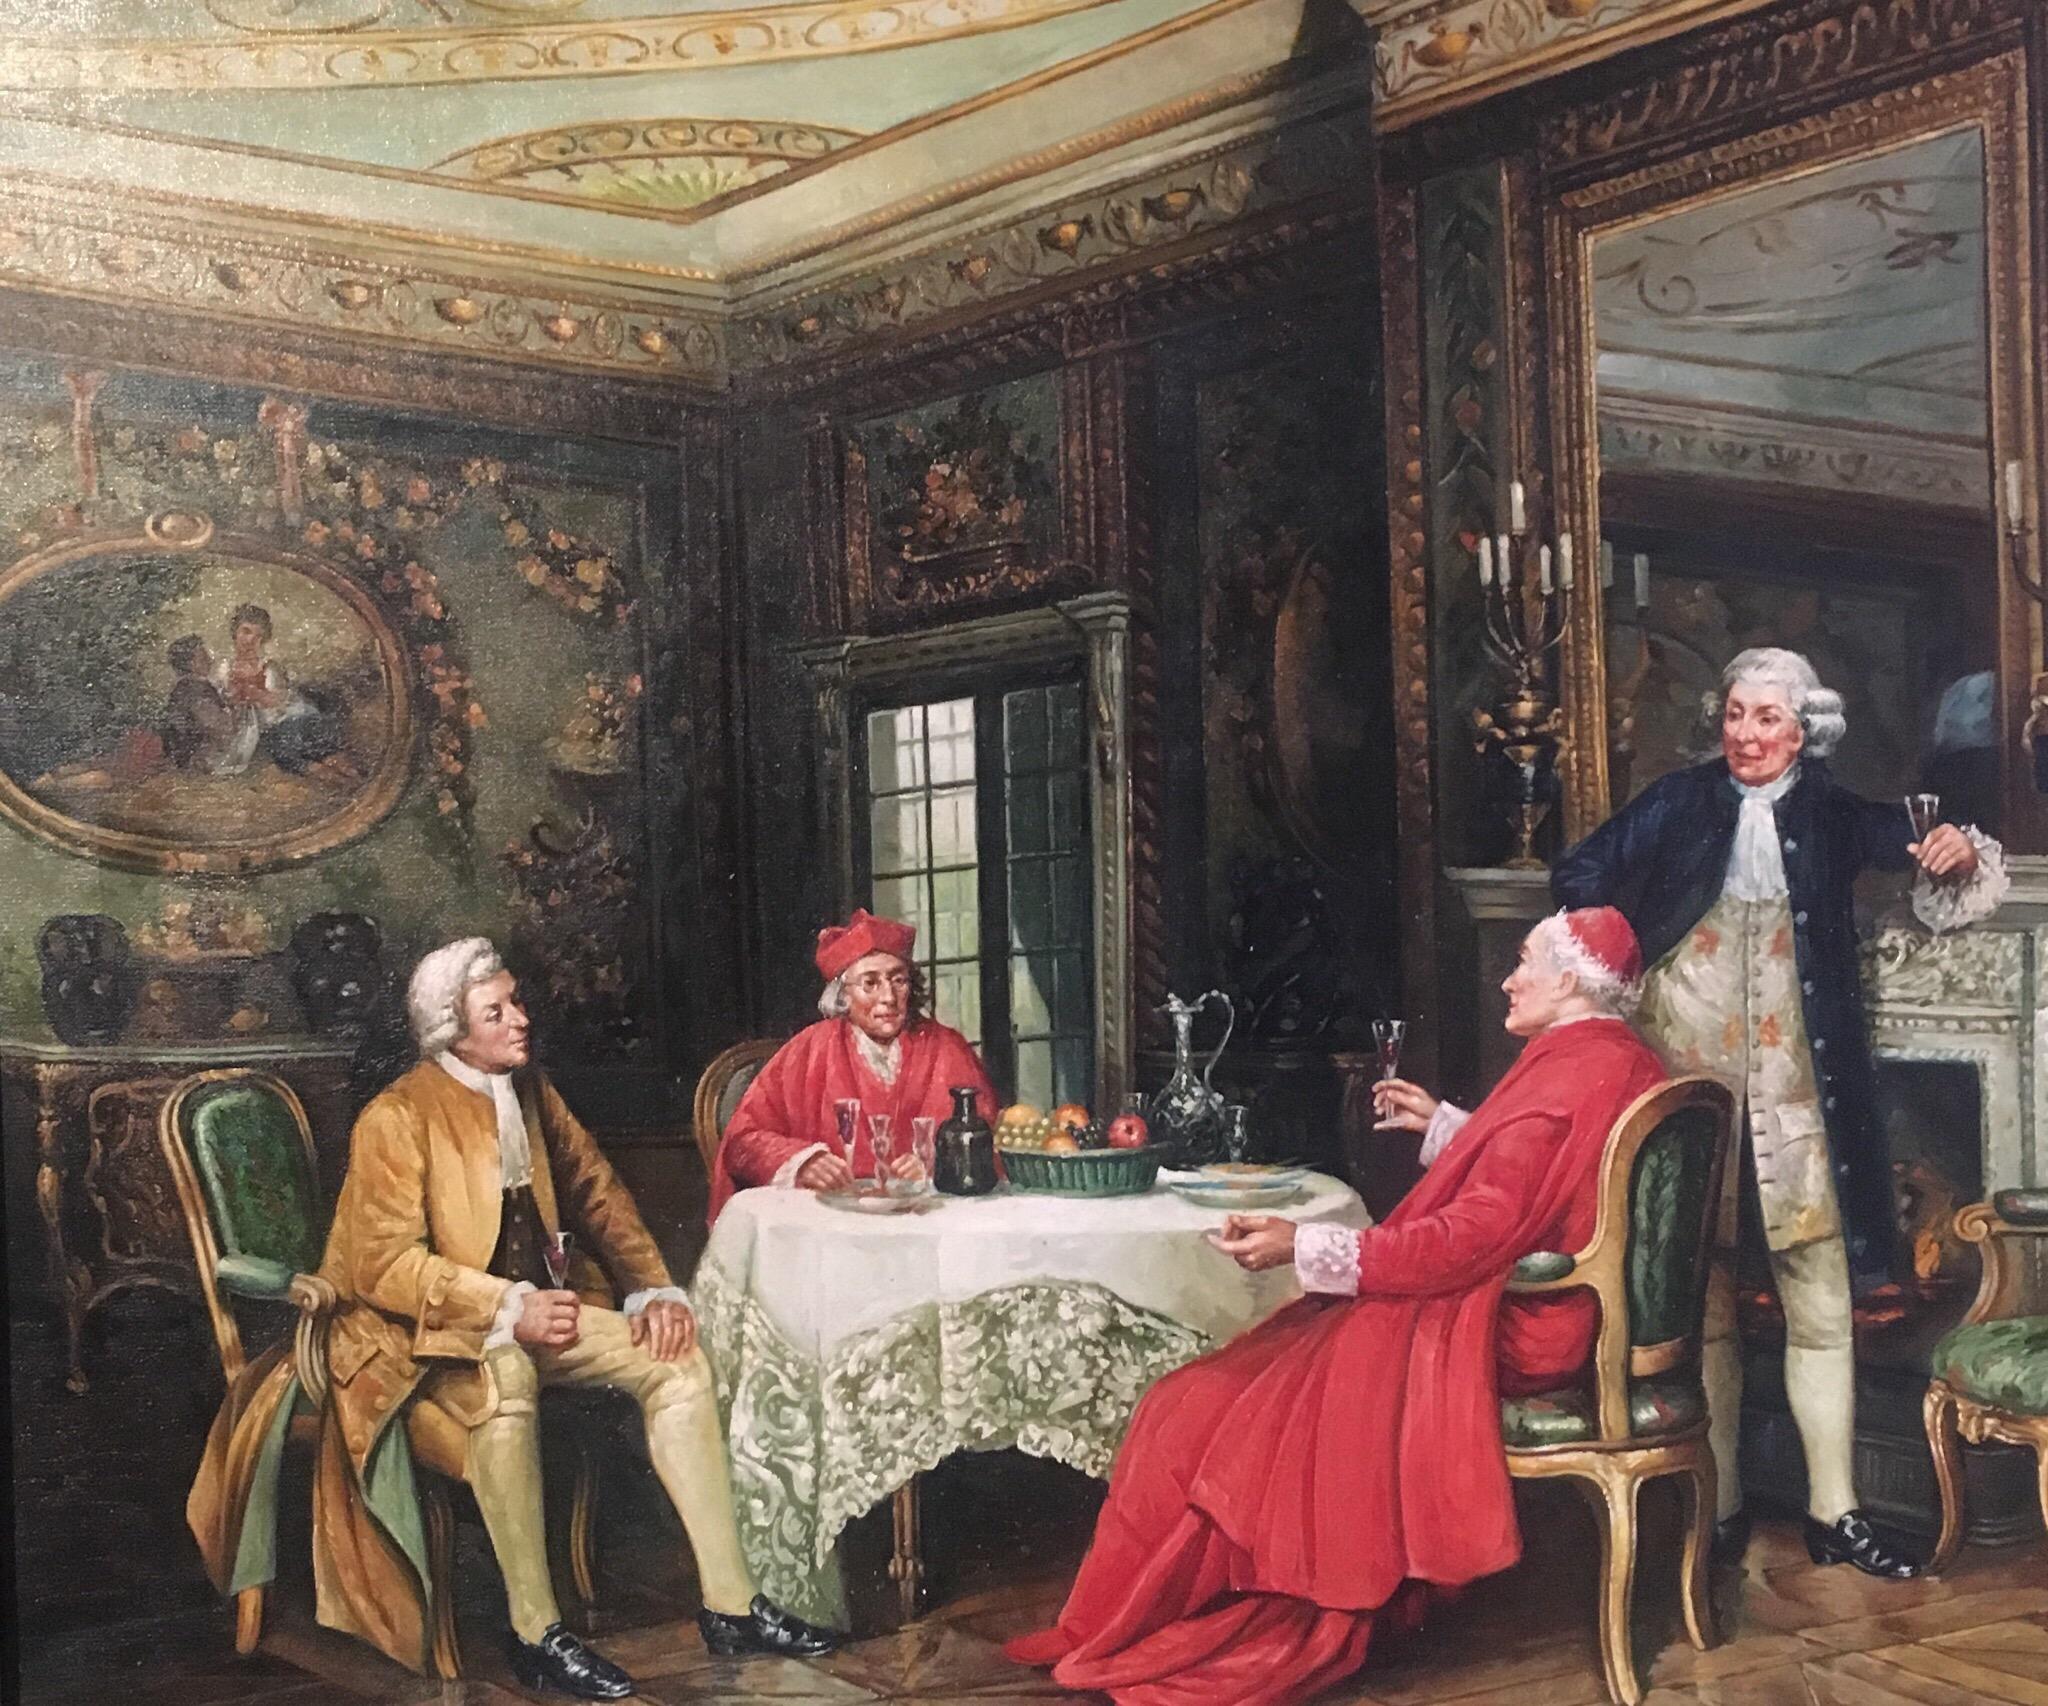 Unknown Portrait Painting - Meeting of the Minds, Large Portrait of Italian Cardinals, Oil Painting